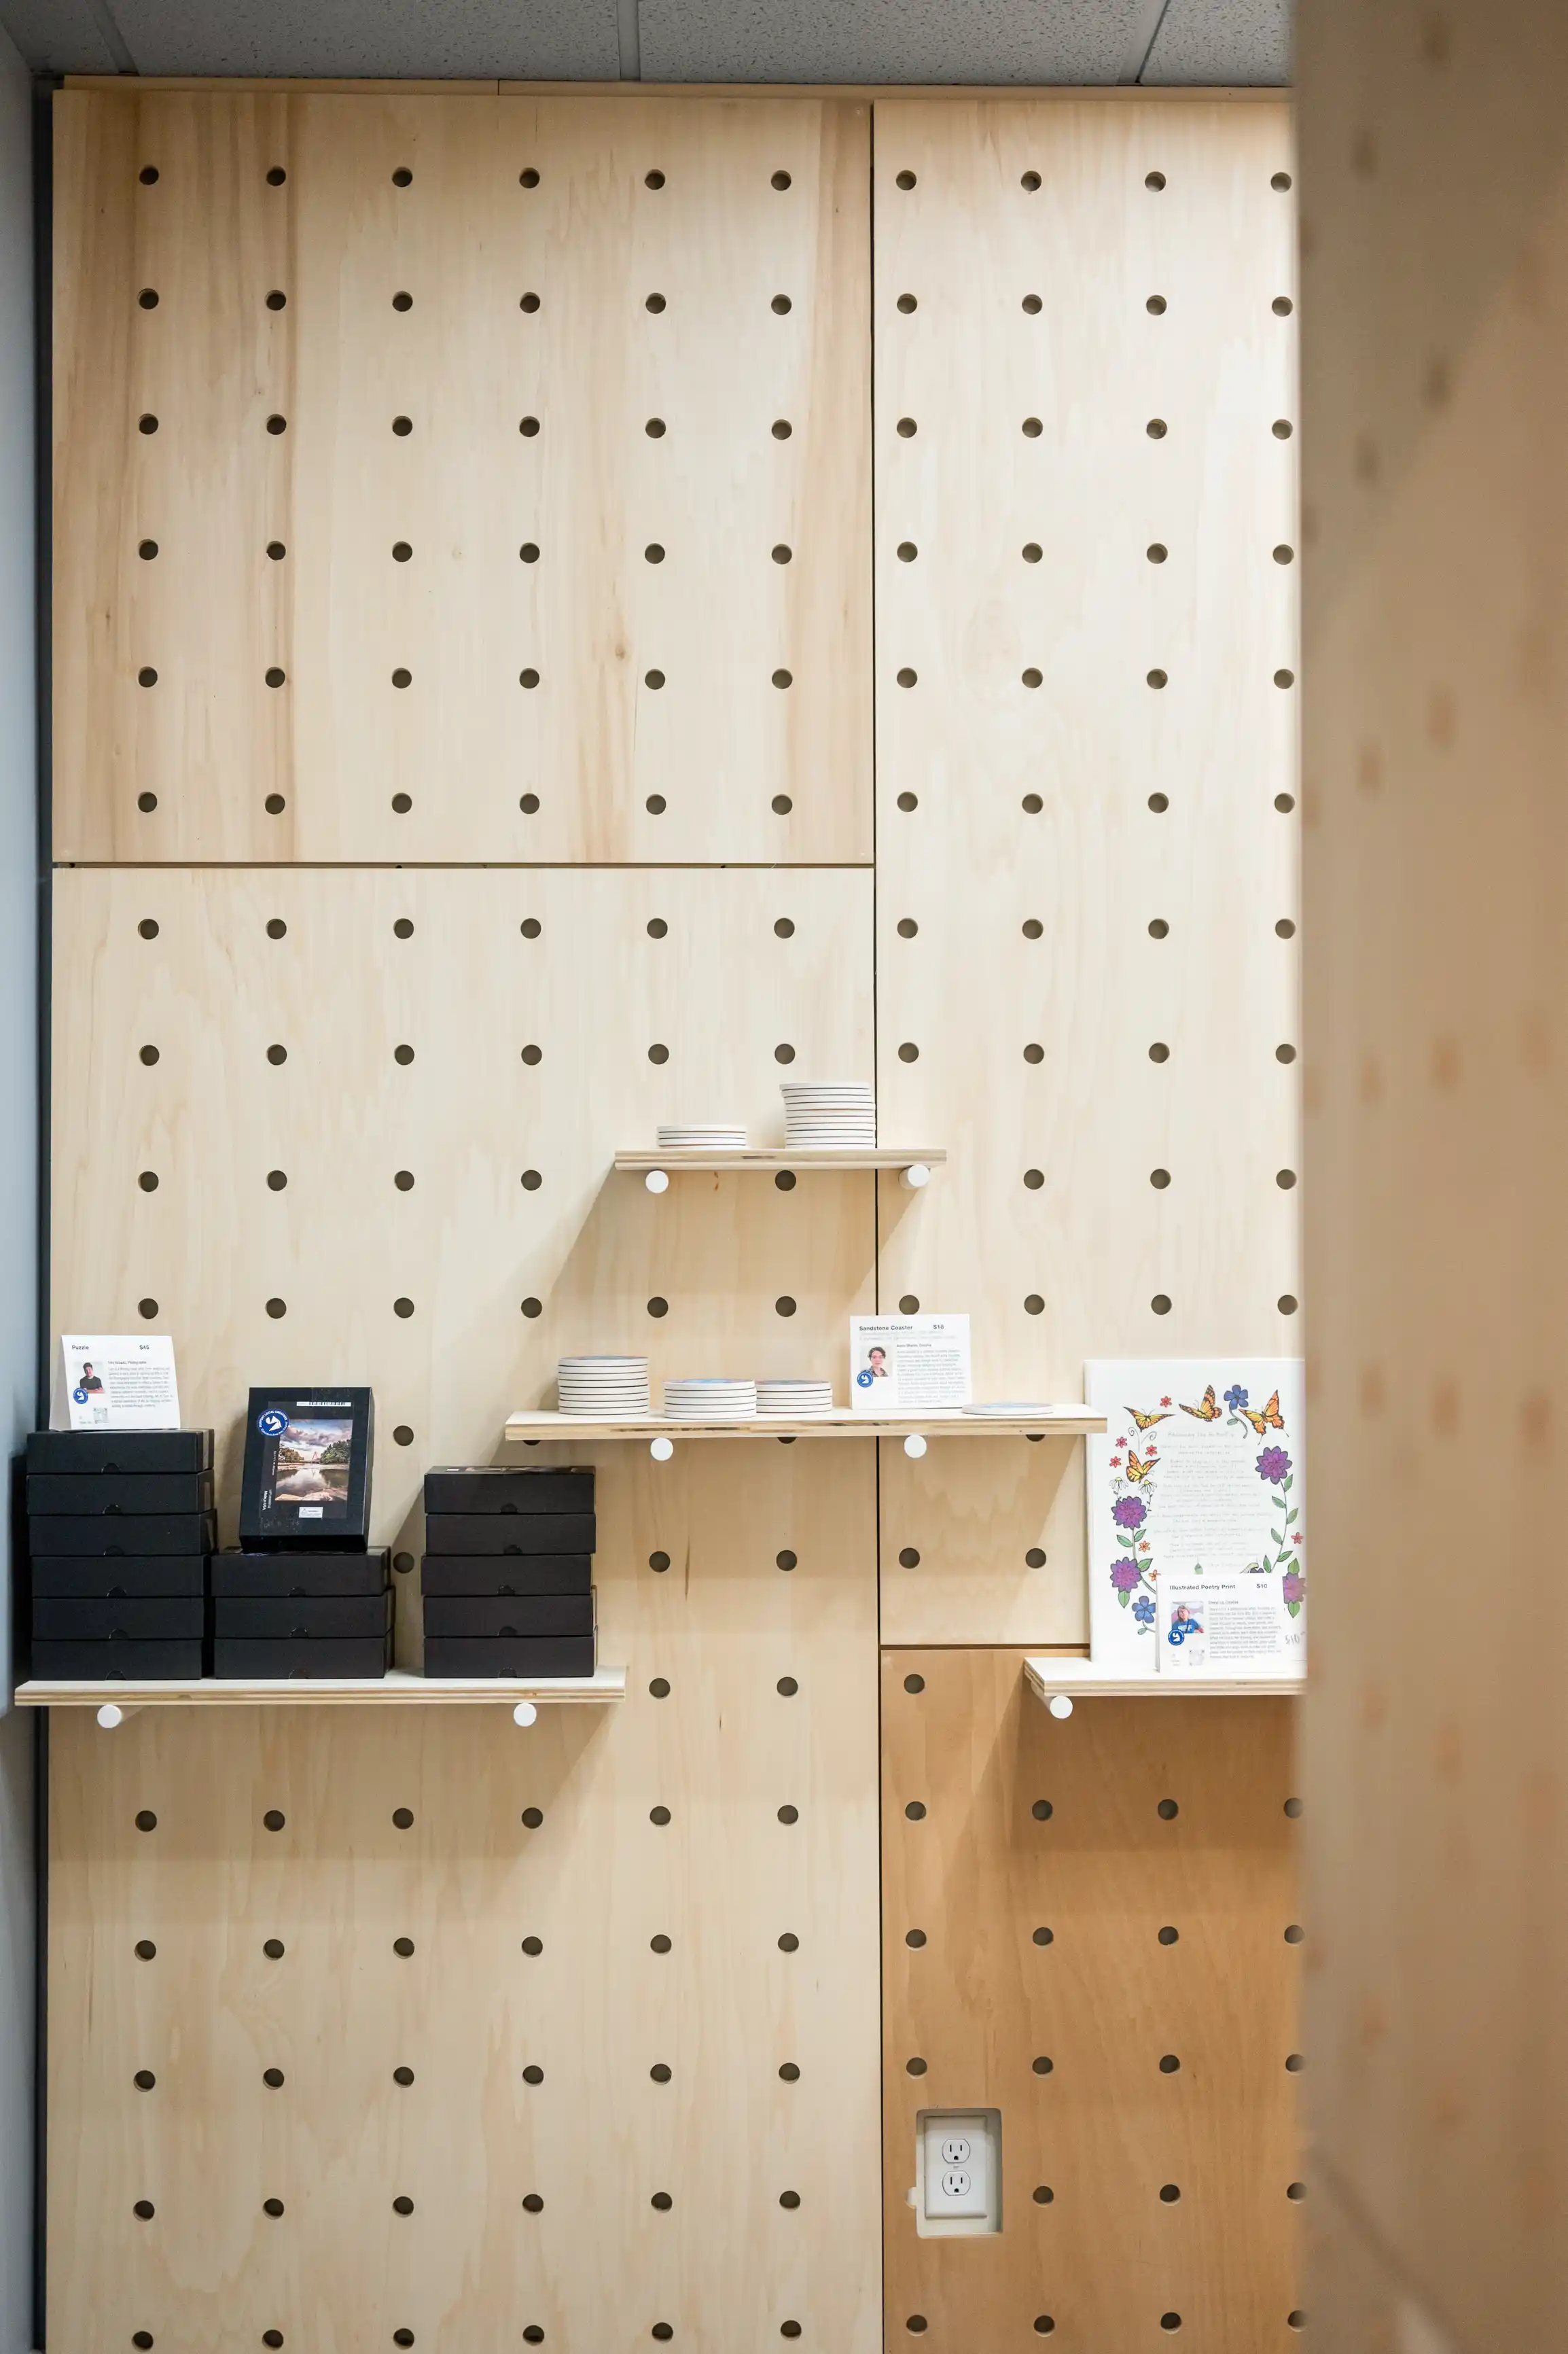 Interior view of a modern plywood wall shelving unit with circular cut-outs, displaying stacks of plates, black boxes, and promotional literature.